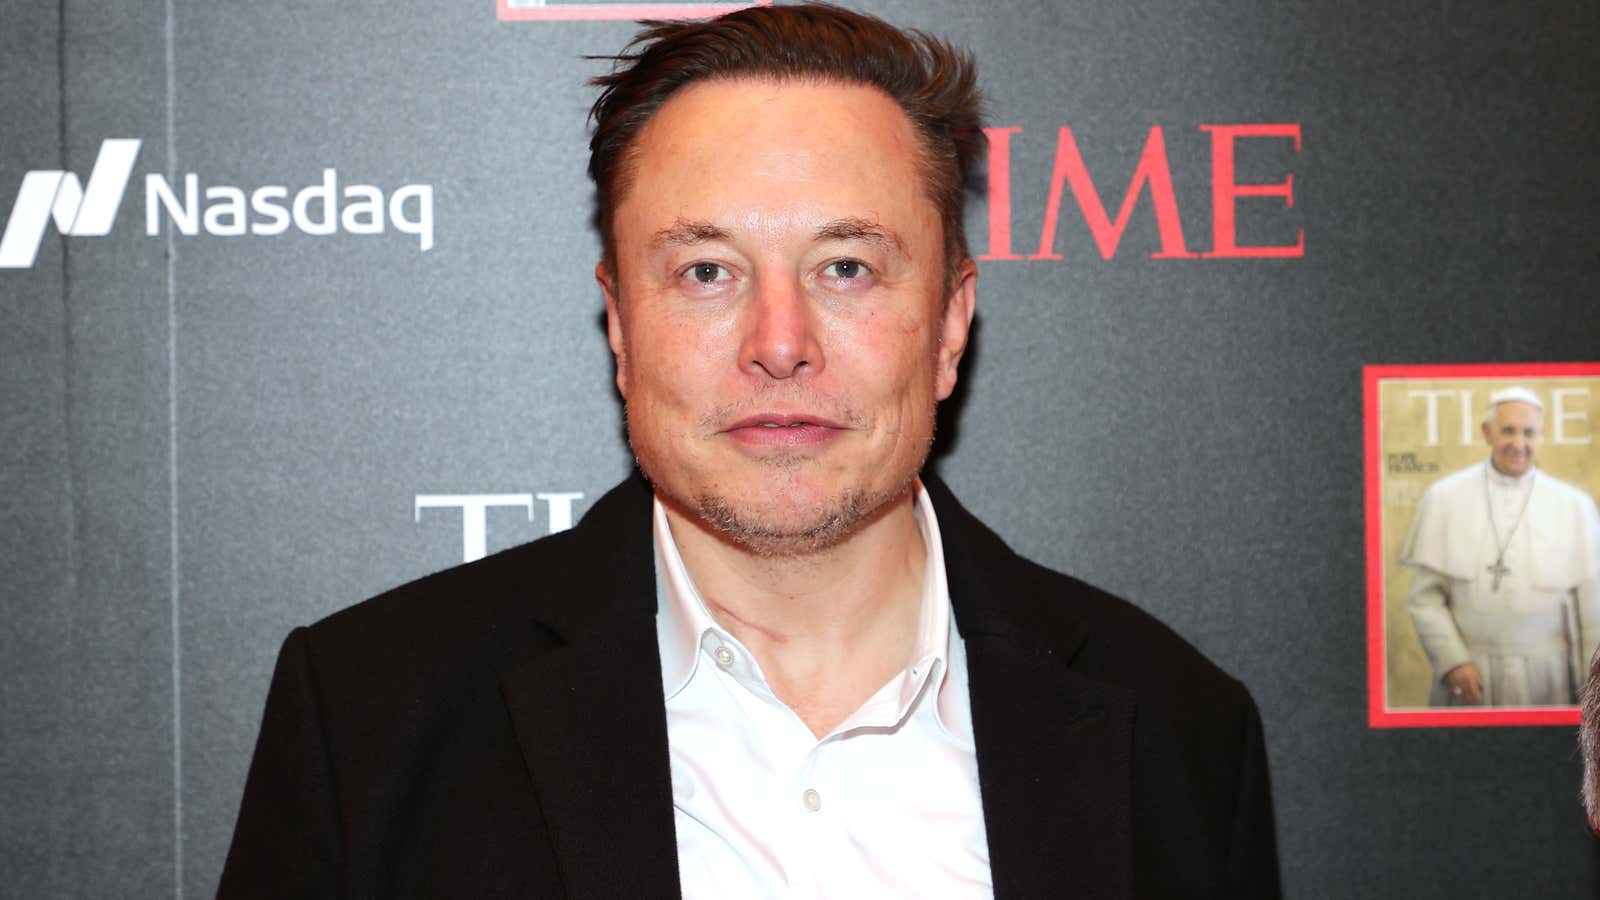 Elon Musk is now banning journalists and competitors on Twitter